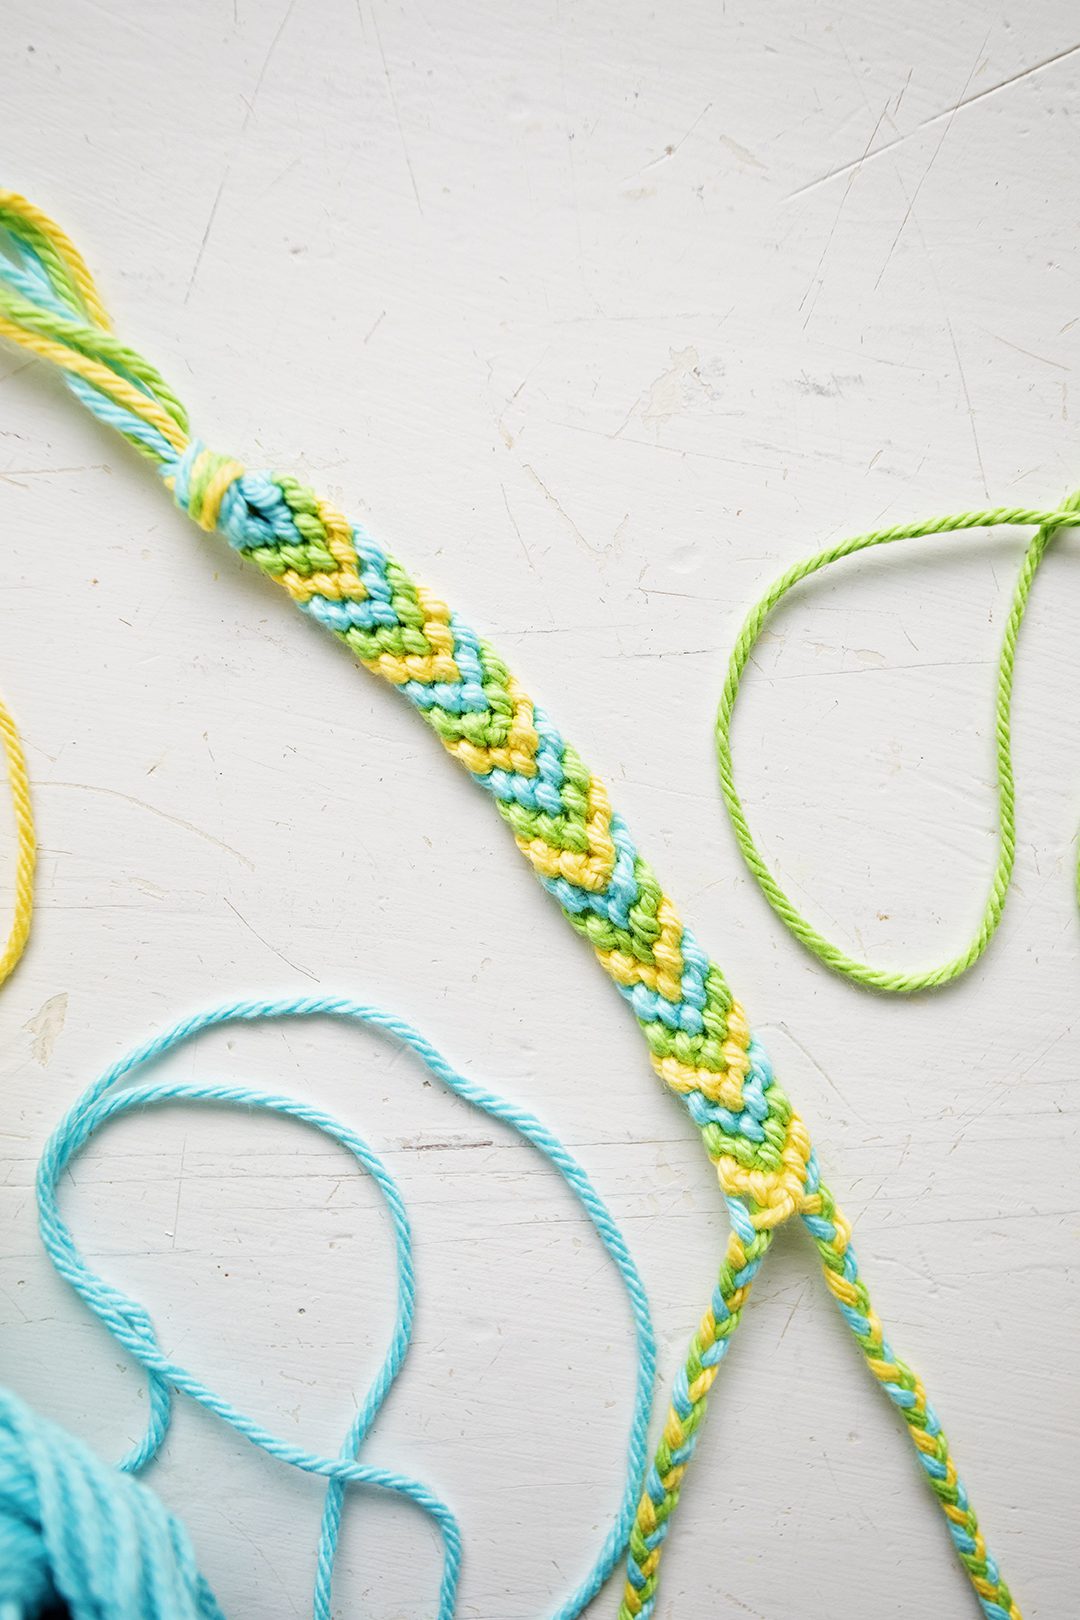 A chevron pattern bracelet made from blue, green, and yellow string.